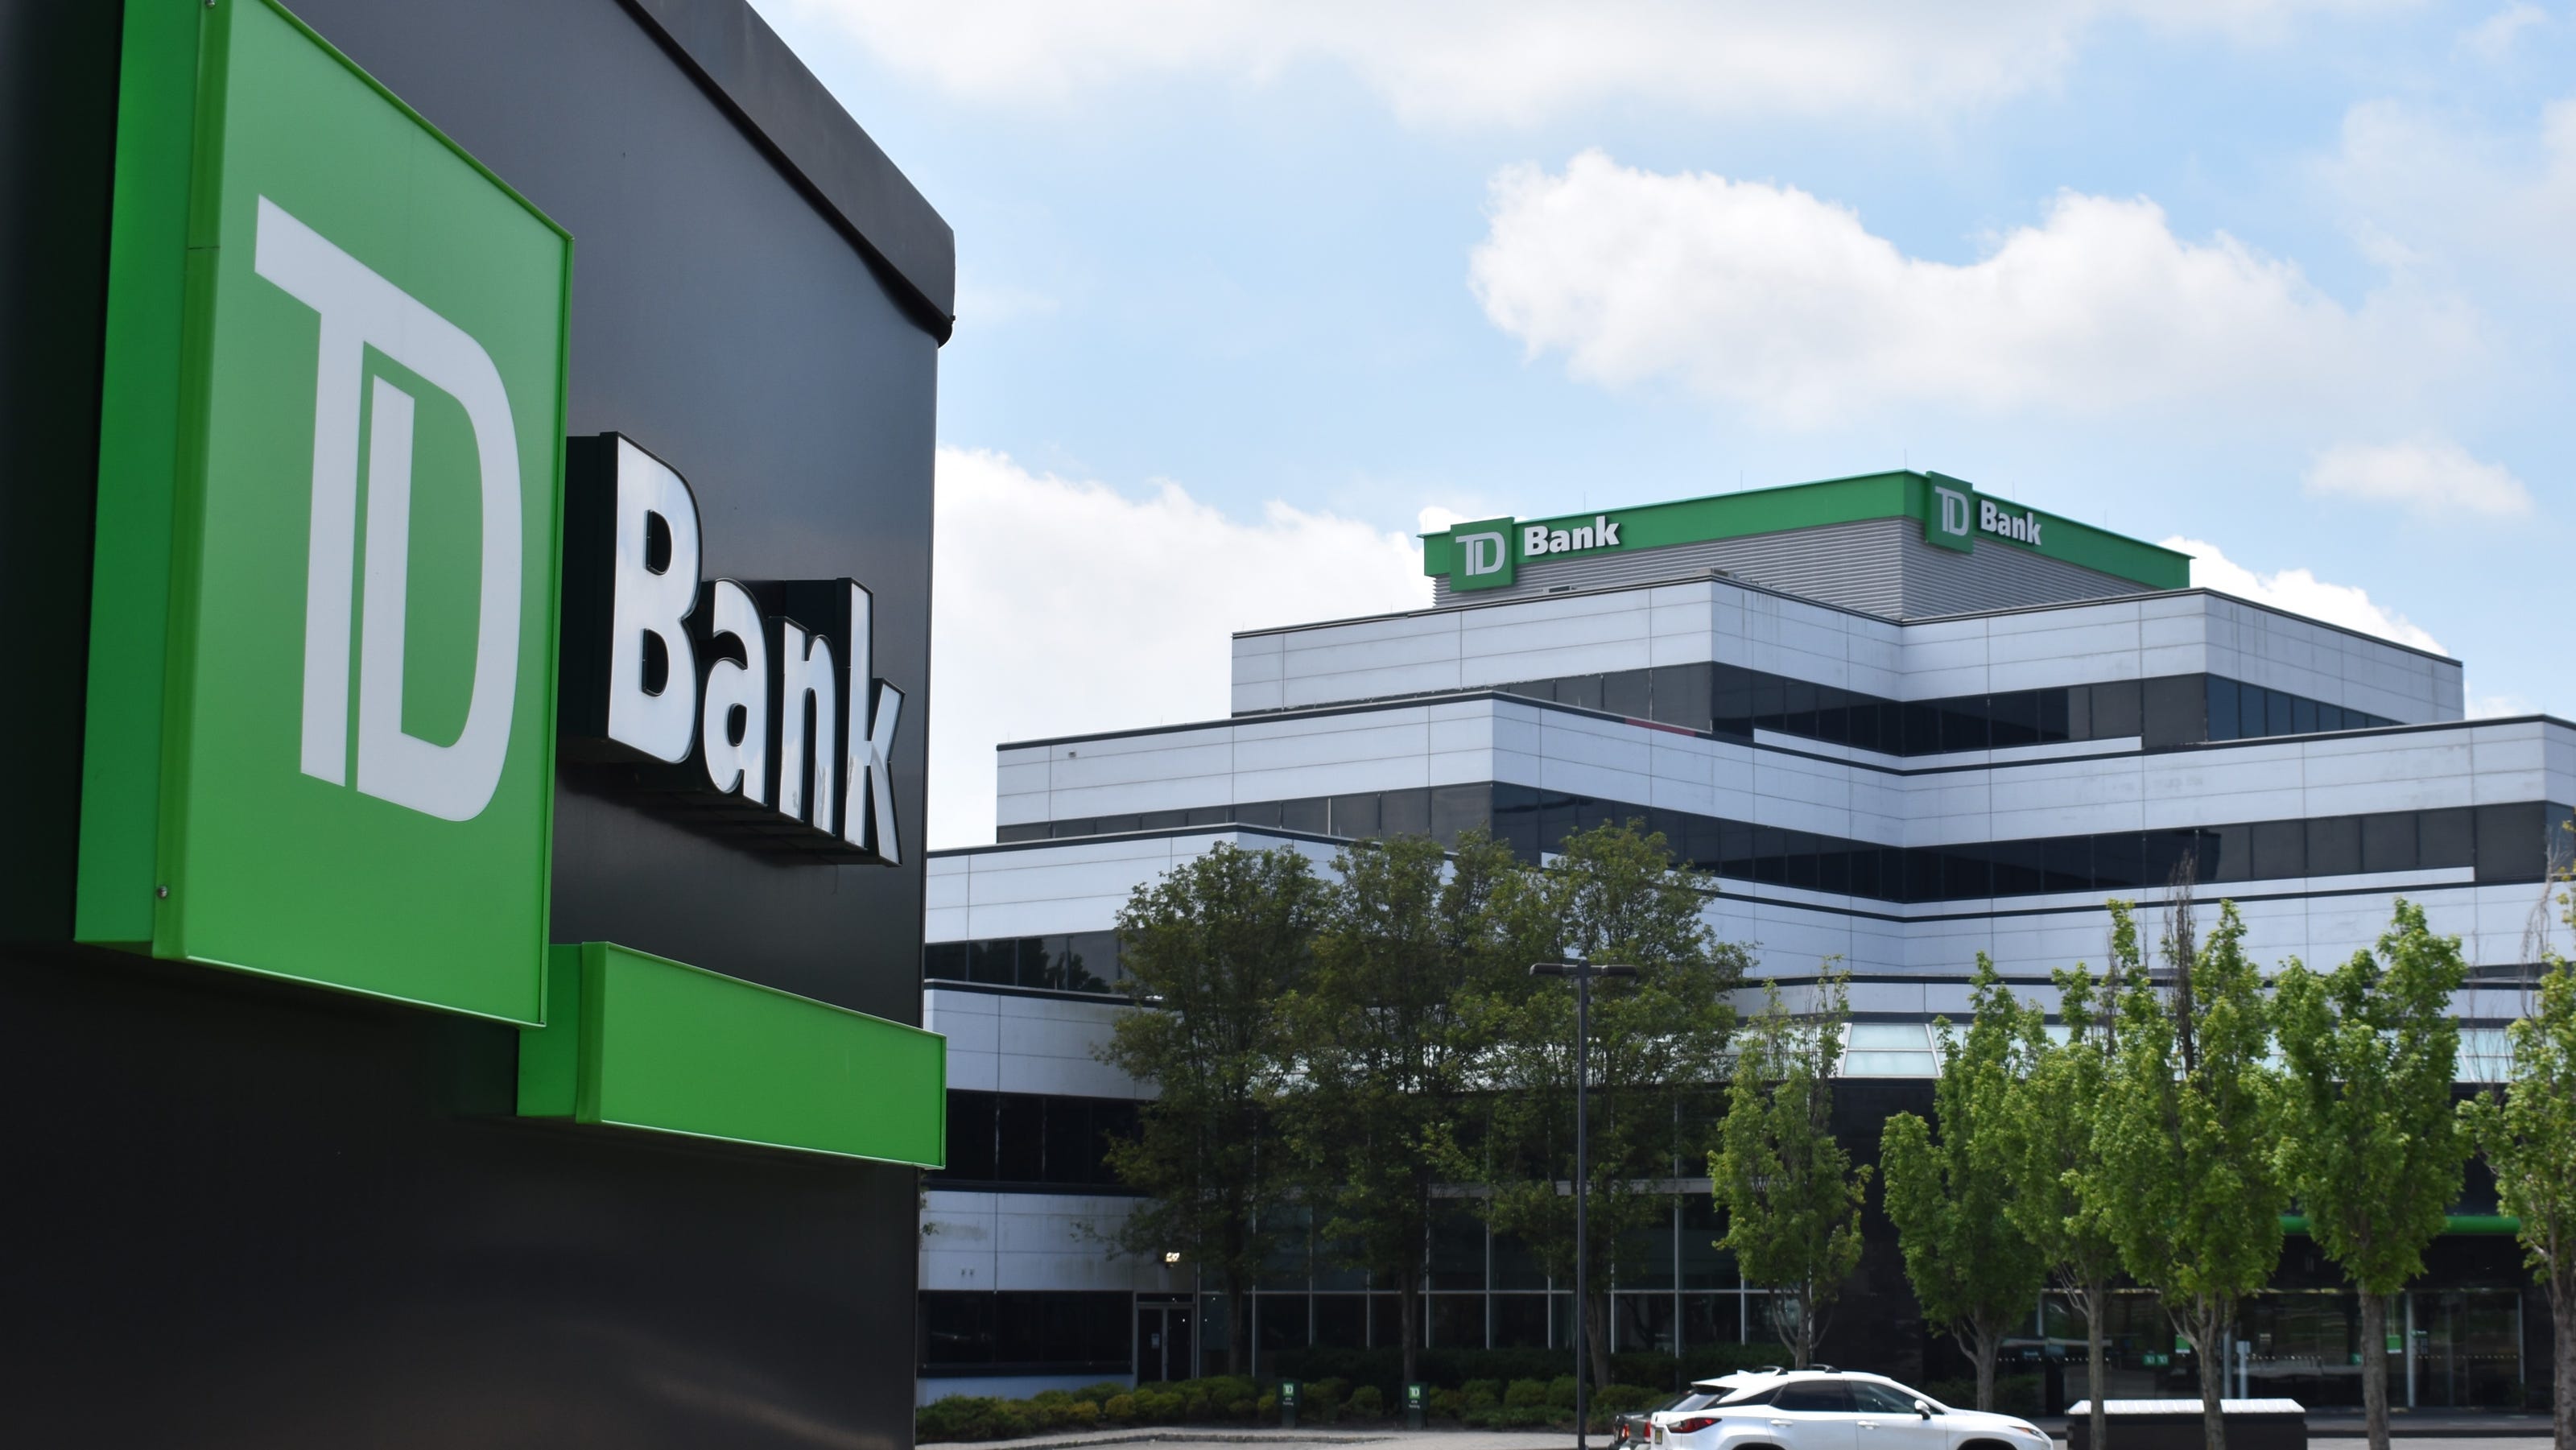 Proposed classaction lawsuit argues TD Bank overcharrged ATM users